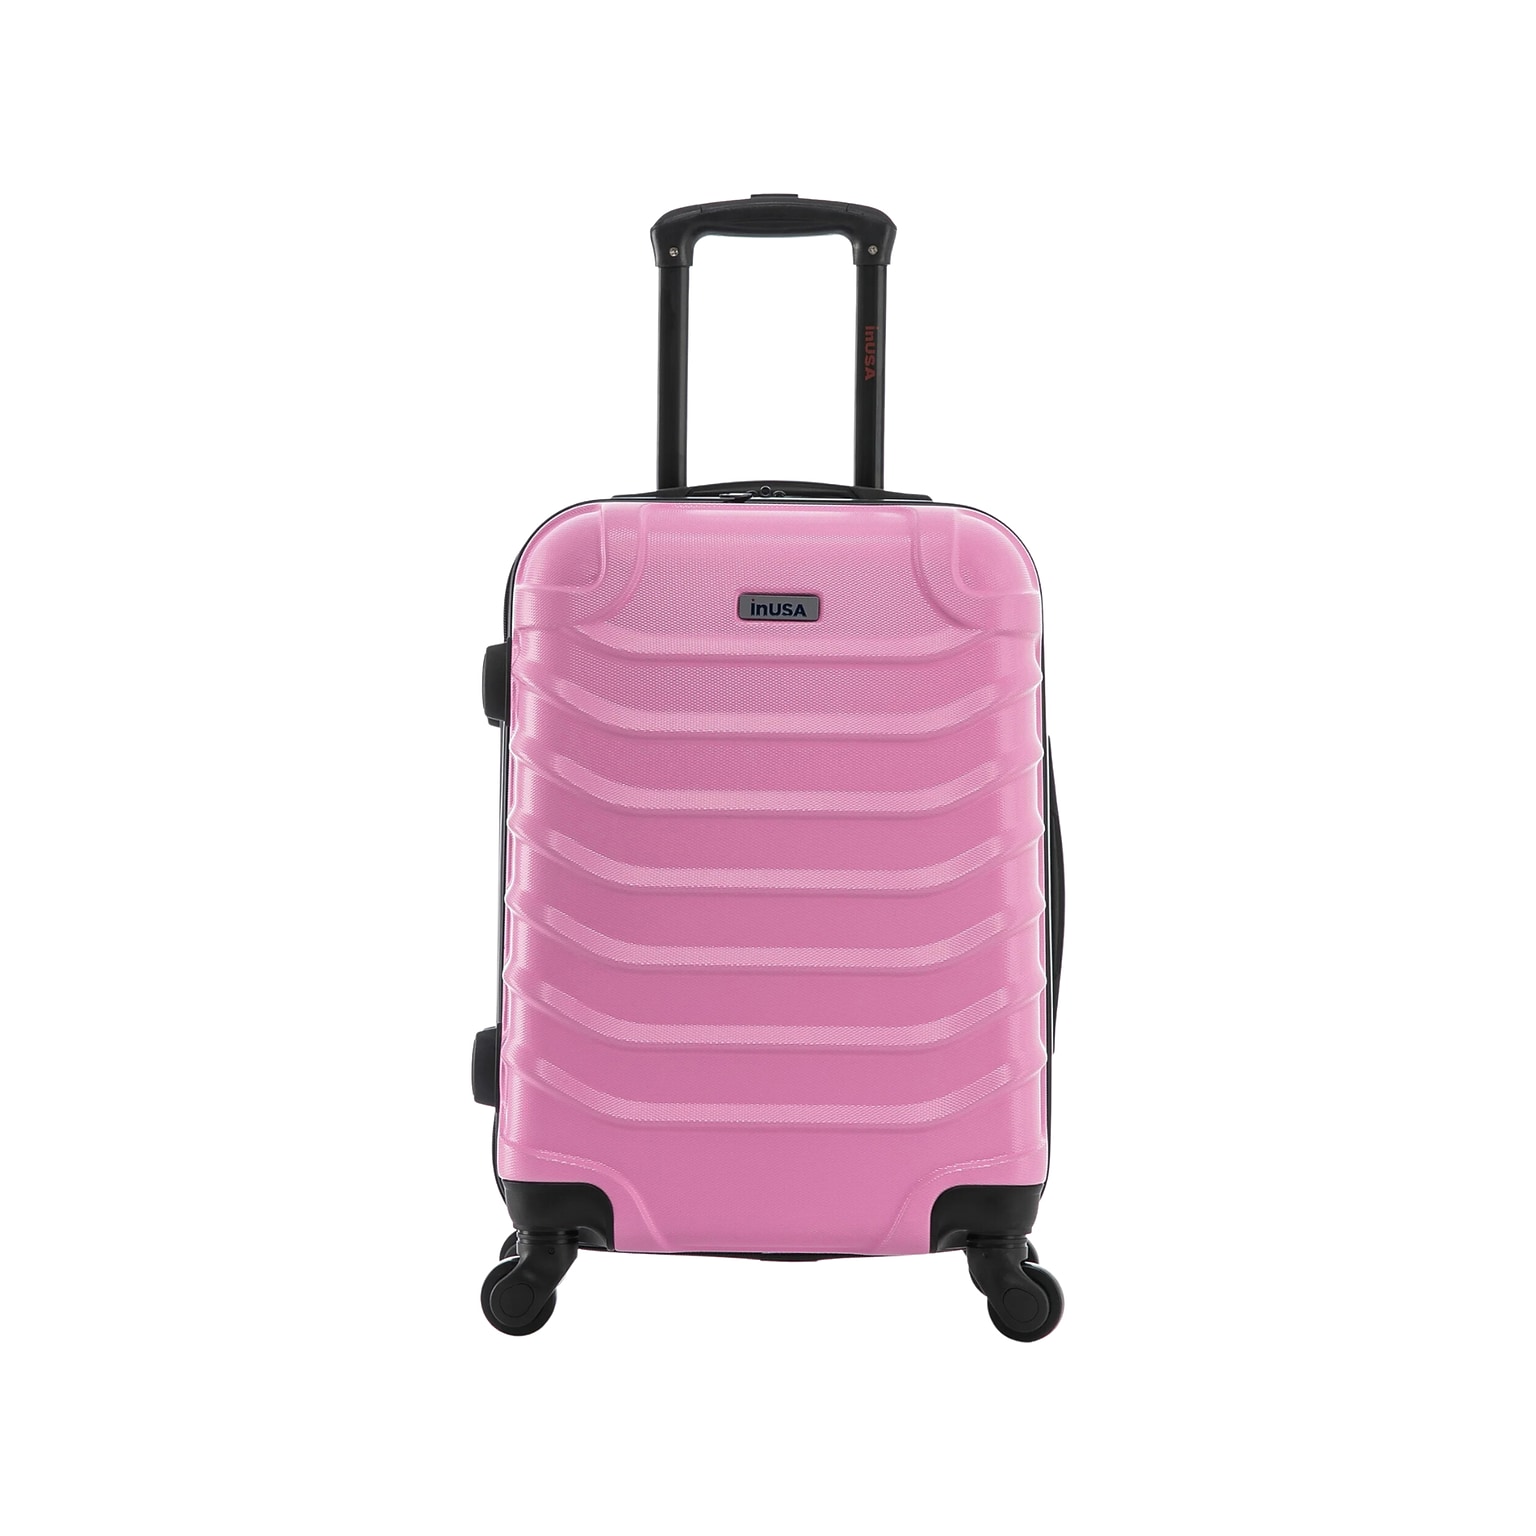 InUSA Endurance 21.45 Hardside Carry-On Suitcase, 4-Wheeled Spinner, Pink (IUEND00S-PNK)